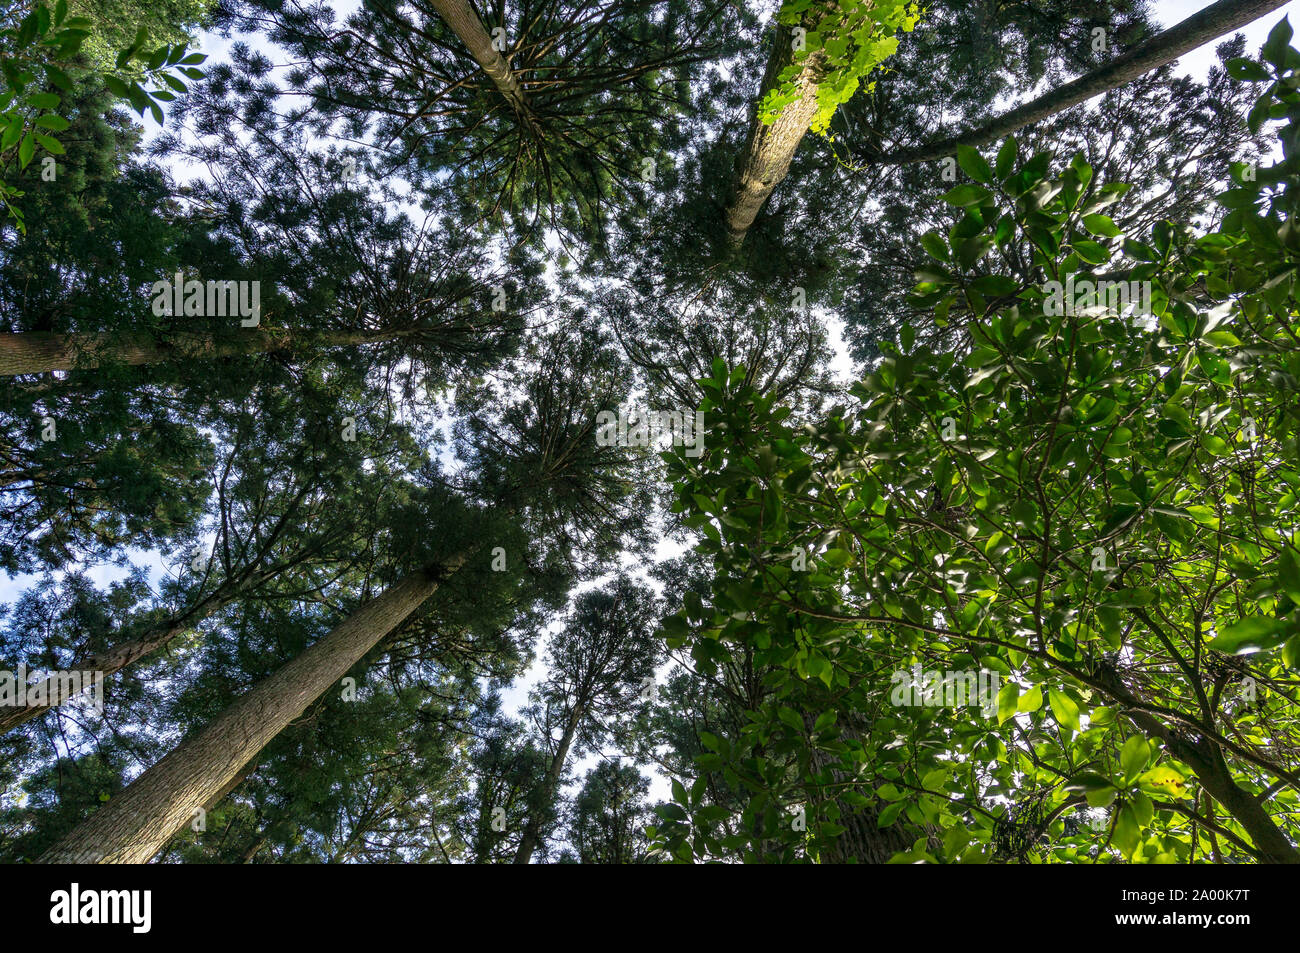 Looking up in the sequoia, redwood forest. Tree canopy, leaves as viewed directly below Stock Photo